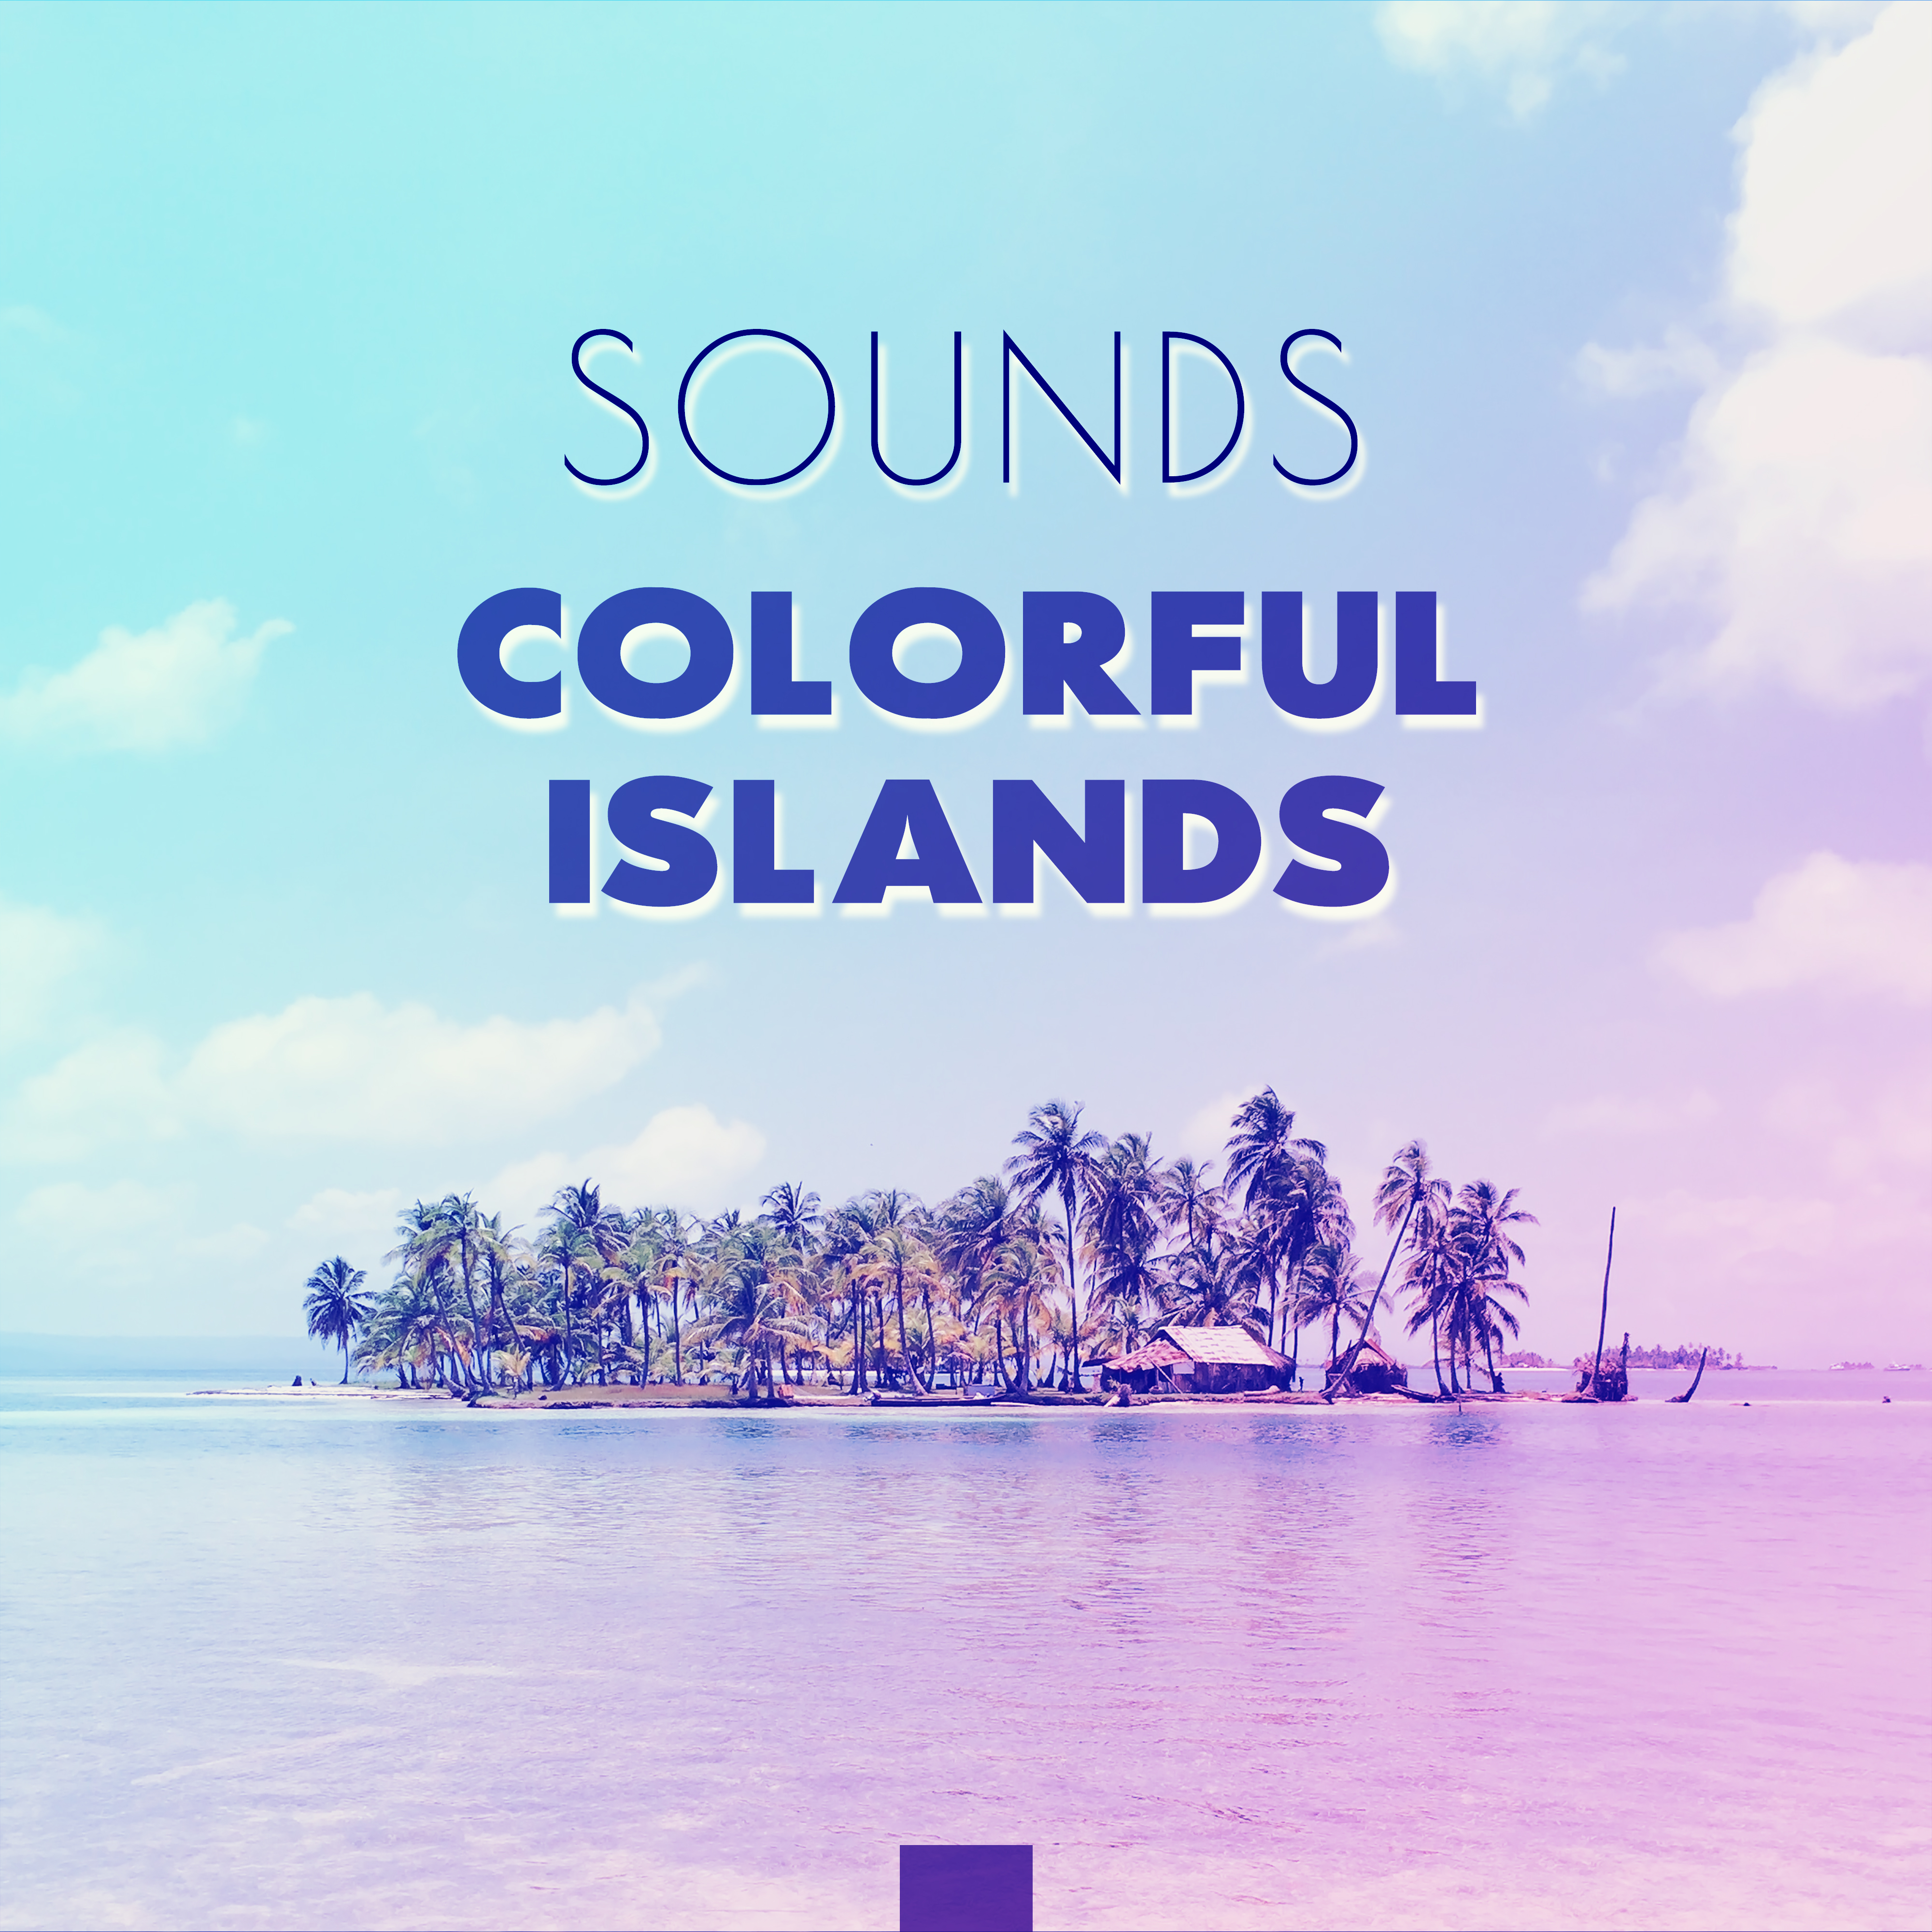 Sounds Colorful Islands - Best Fun, Colors in Drinks, Mandatory Dress, **** Dance, Racing on the Beach